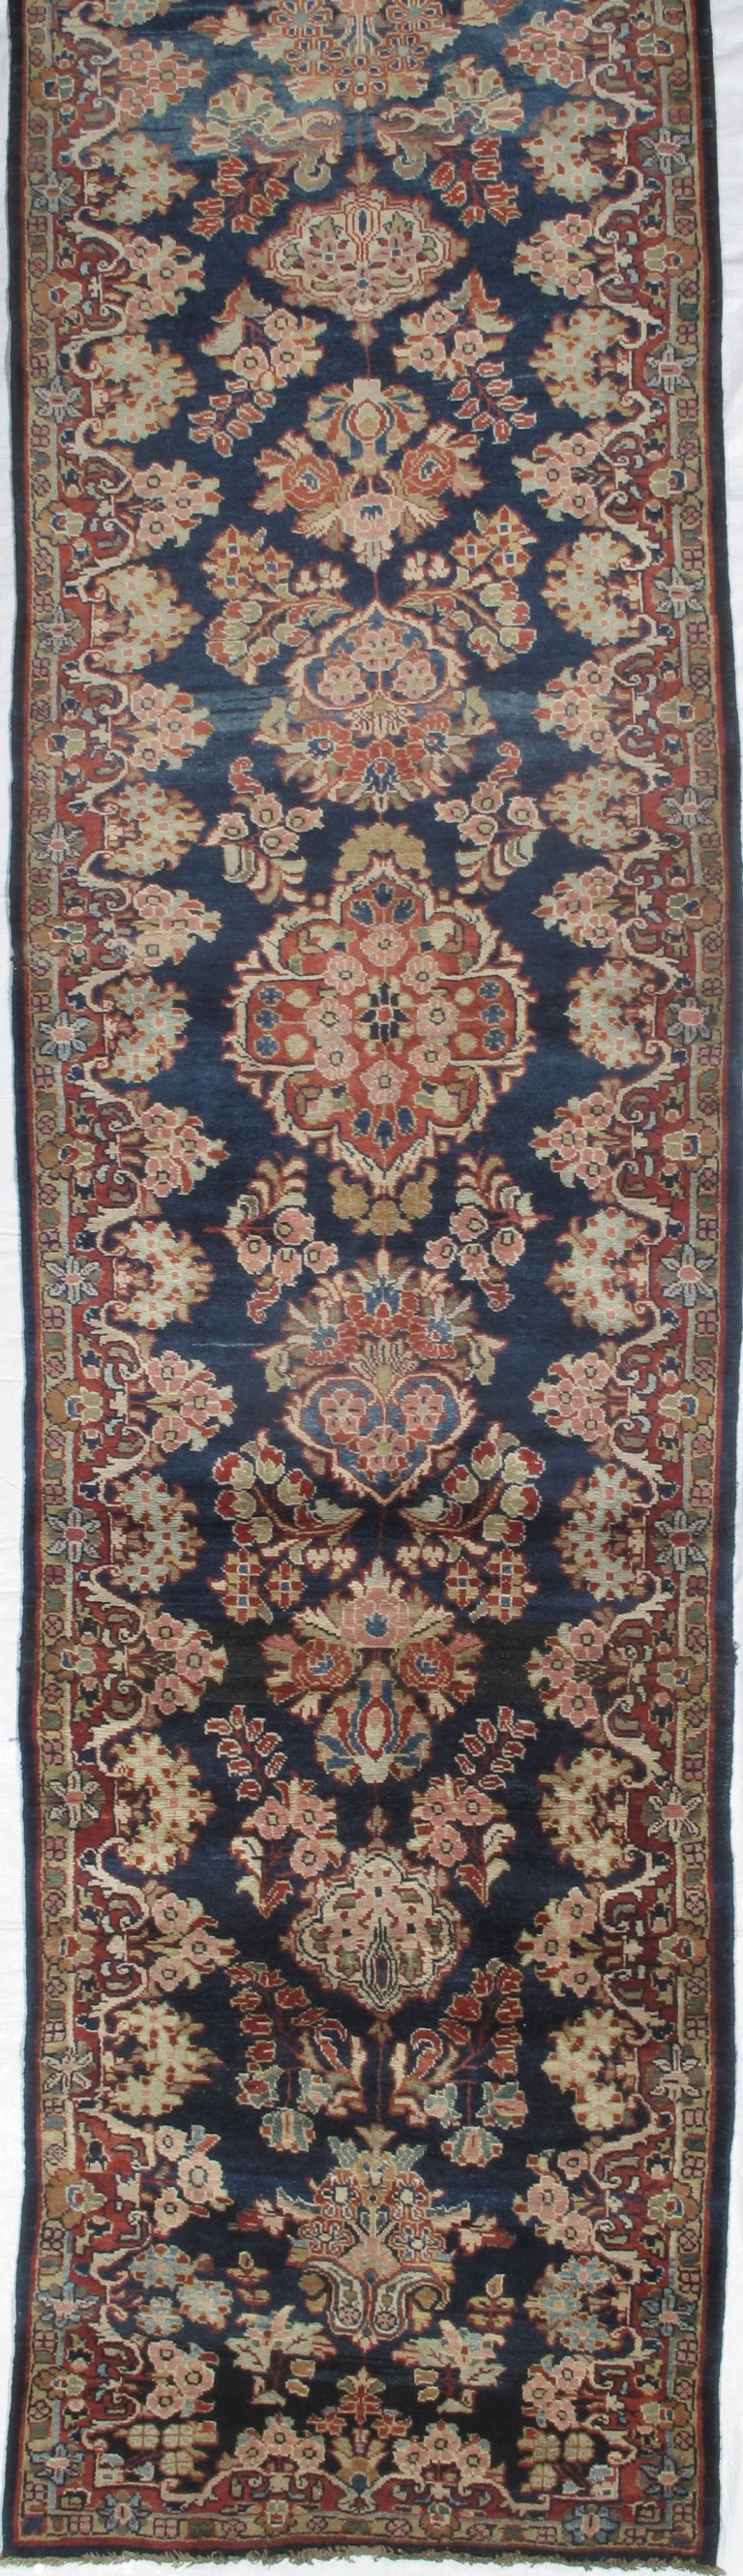 2273 Malayer 3 ft 8 in x 15 ft 4 in (112 x 467)